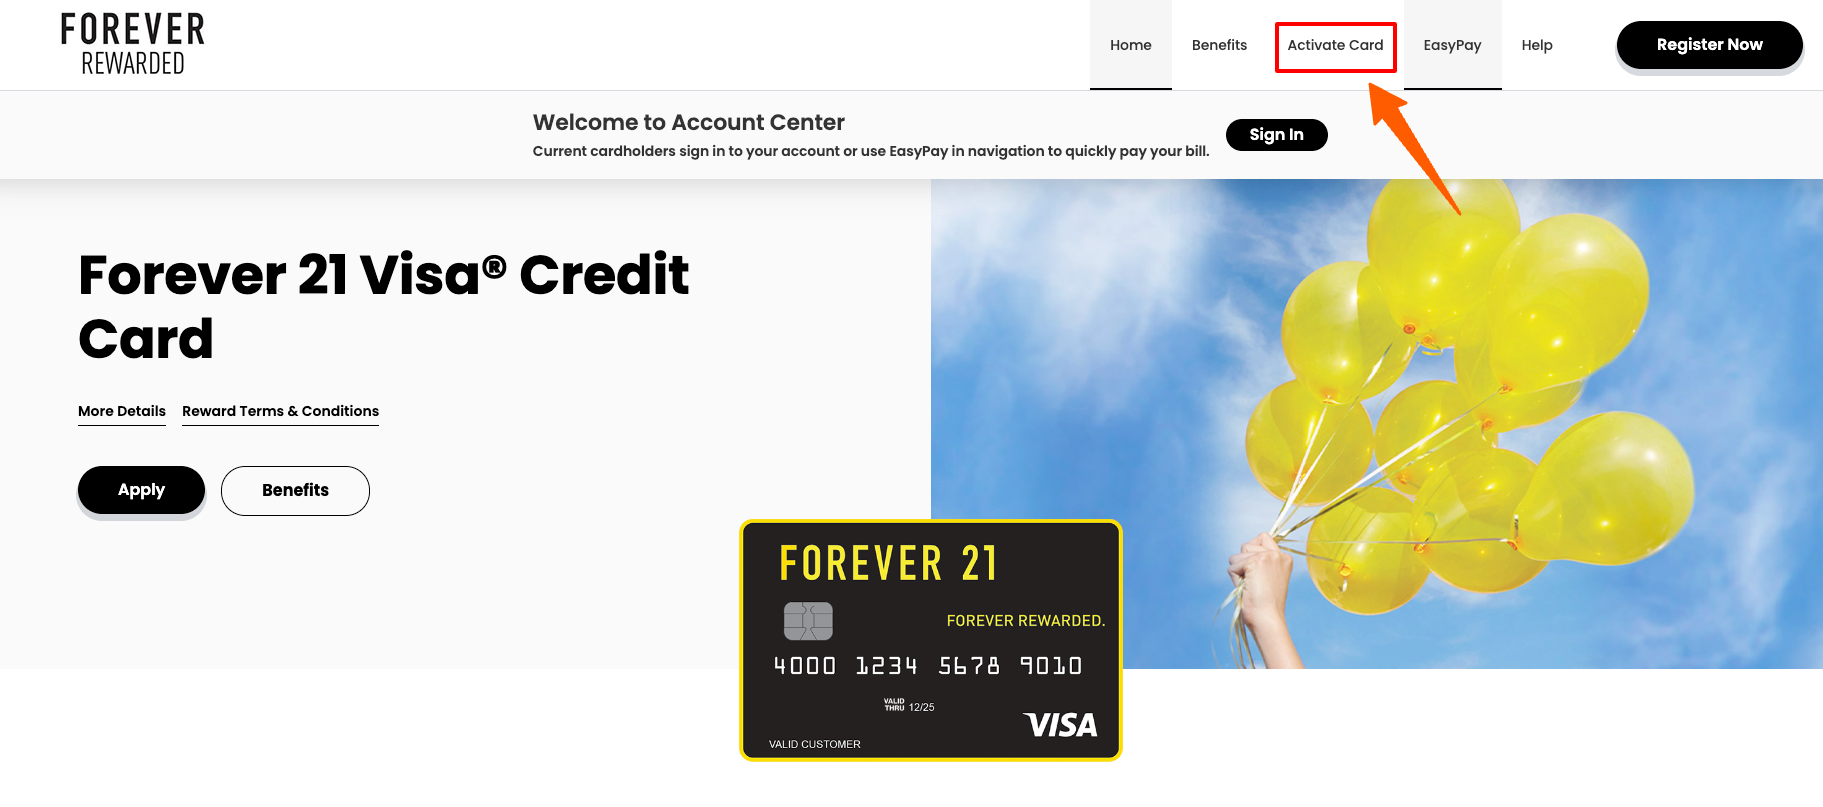 forever21 credit card activate